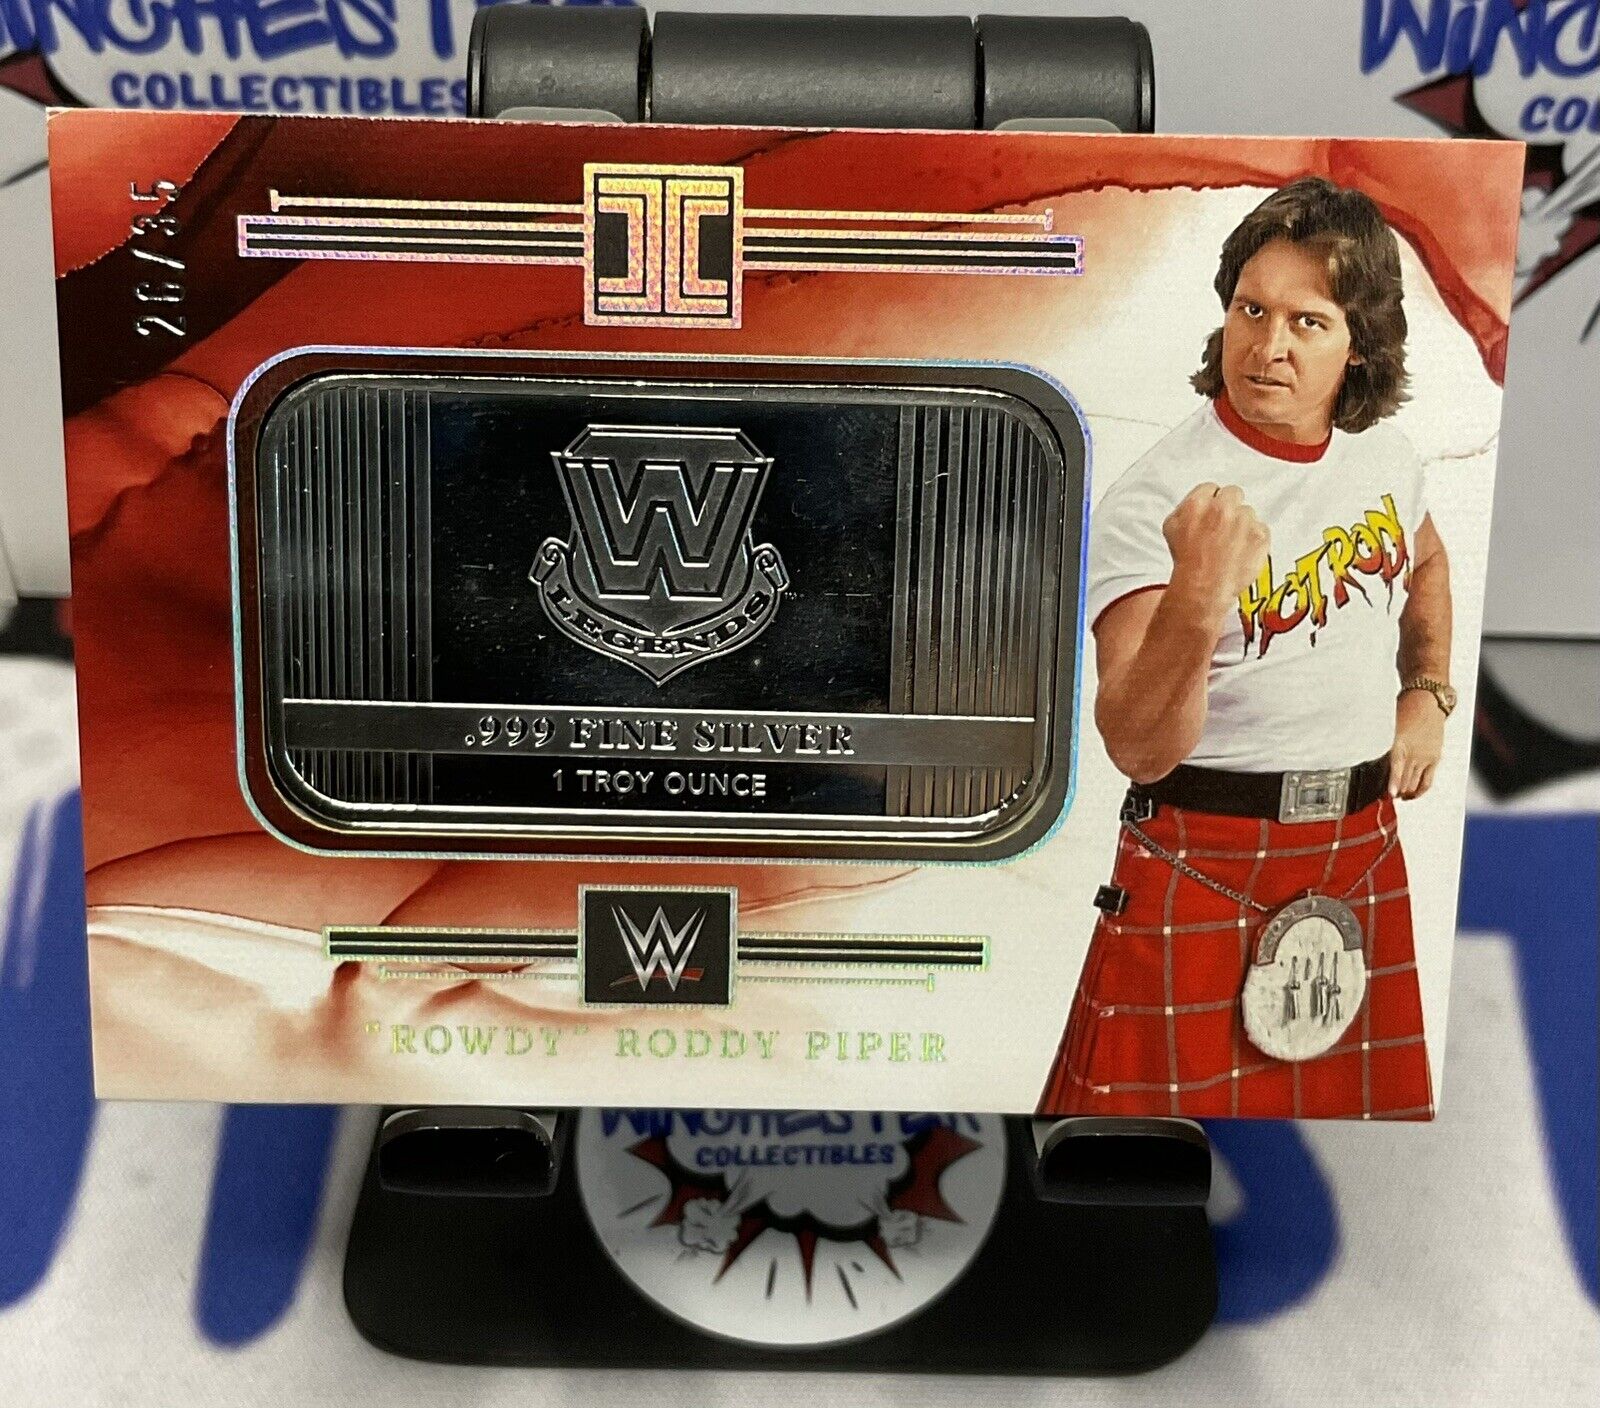 Panini IMPECCABLE WWE SILVER BAR 1 TROY OUNCE SILVER BAR “ROWDY” RODDY PIPER /35